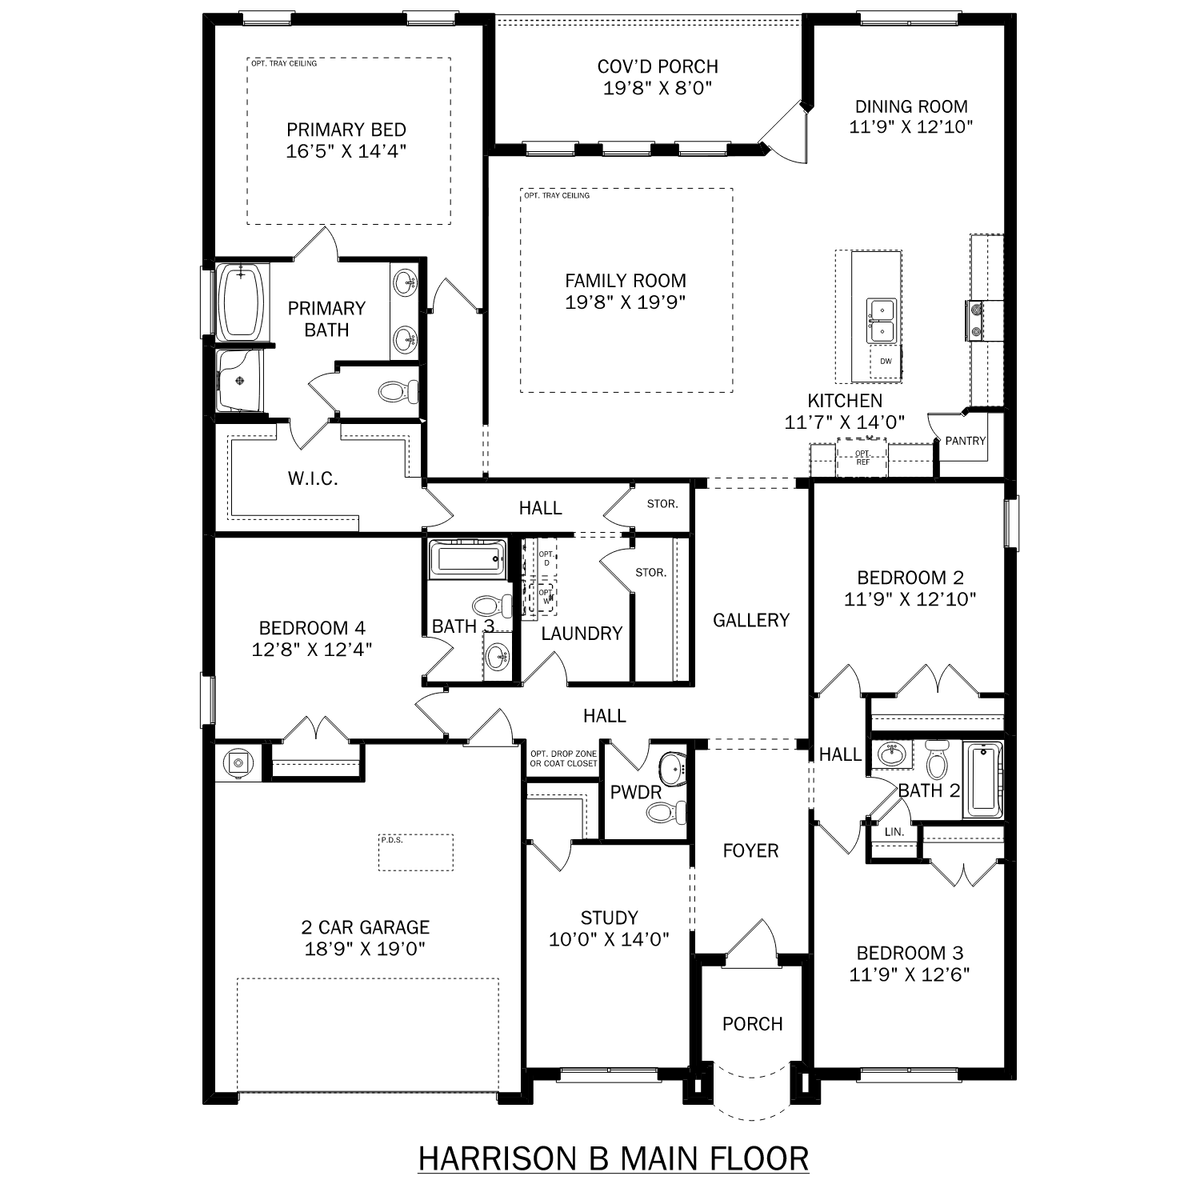 1 - The Harrison B floor plan layout for 600 Ronnie Drive in Davidson Homes' Cain Park community.